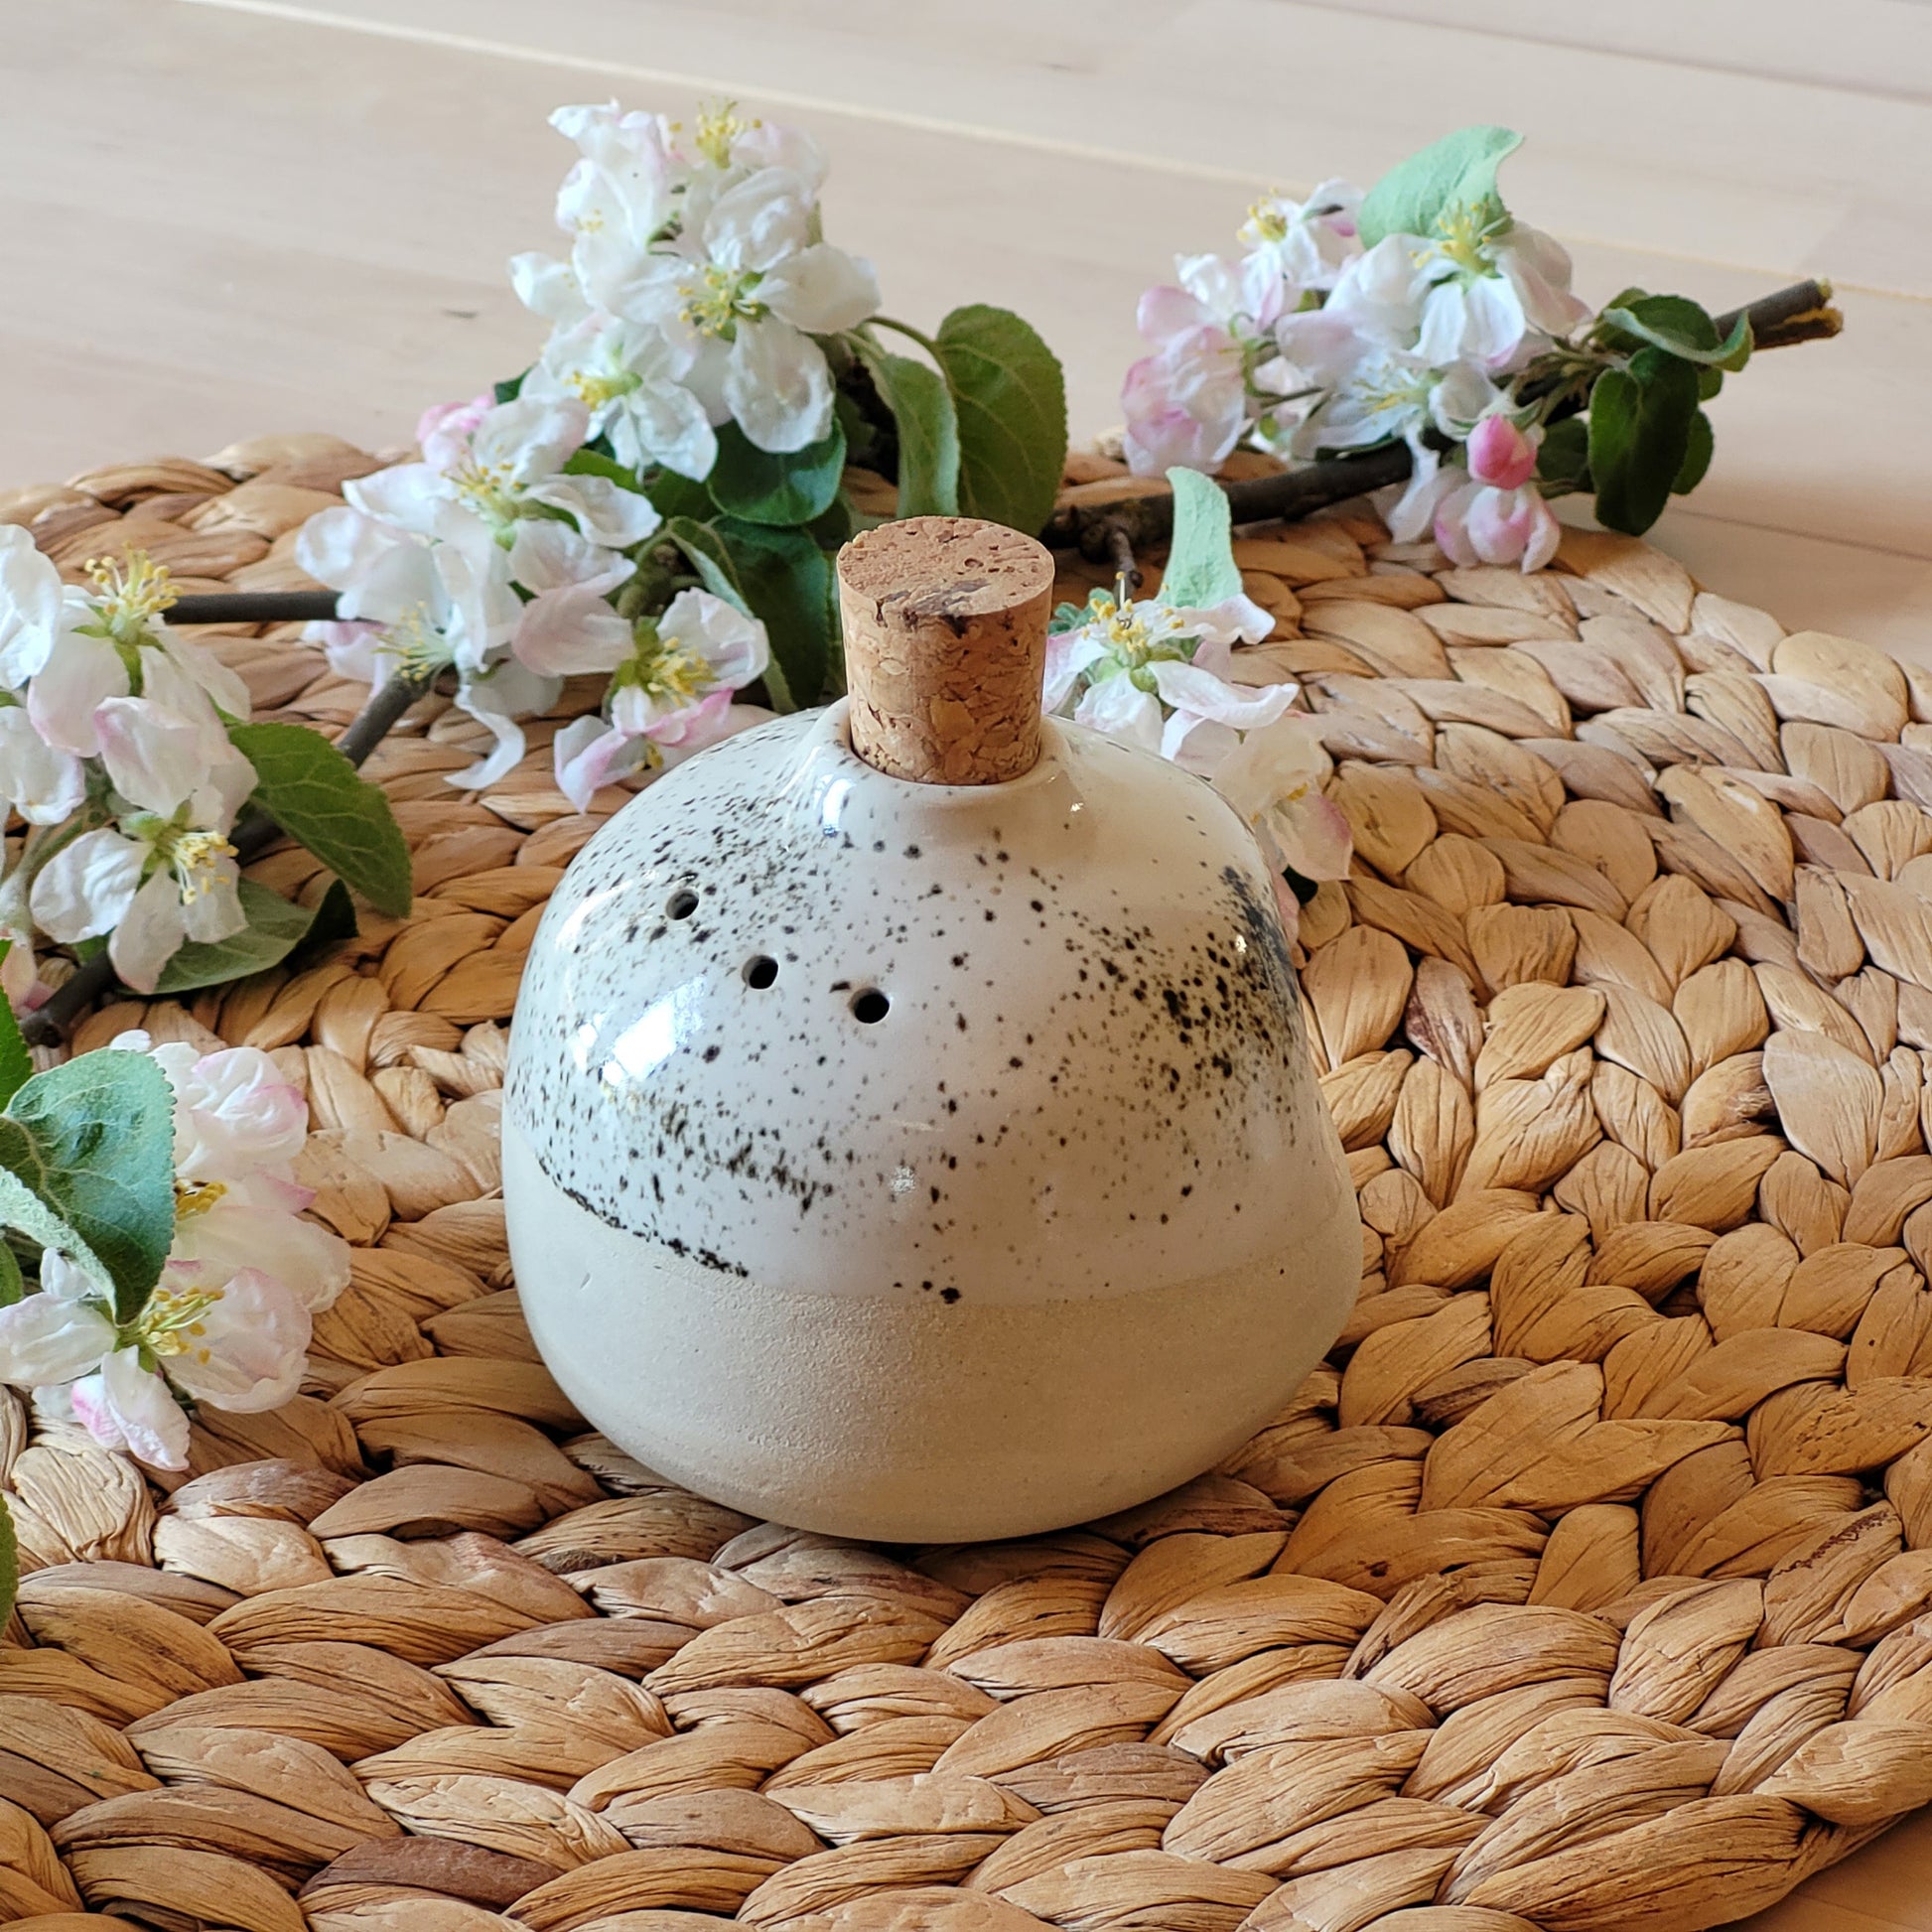 Beautiful handmade pottery salt and pepper shakers. These unique stoneware shakers are the perfect housewarming gift. Handcrafted and food-safe, each piece is one-of-a-kind.